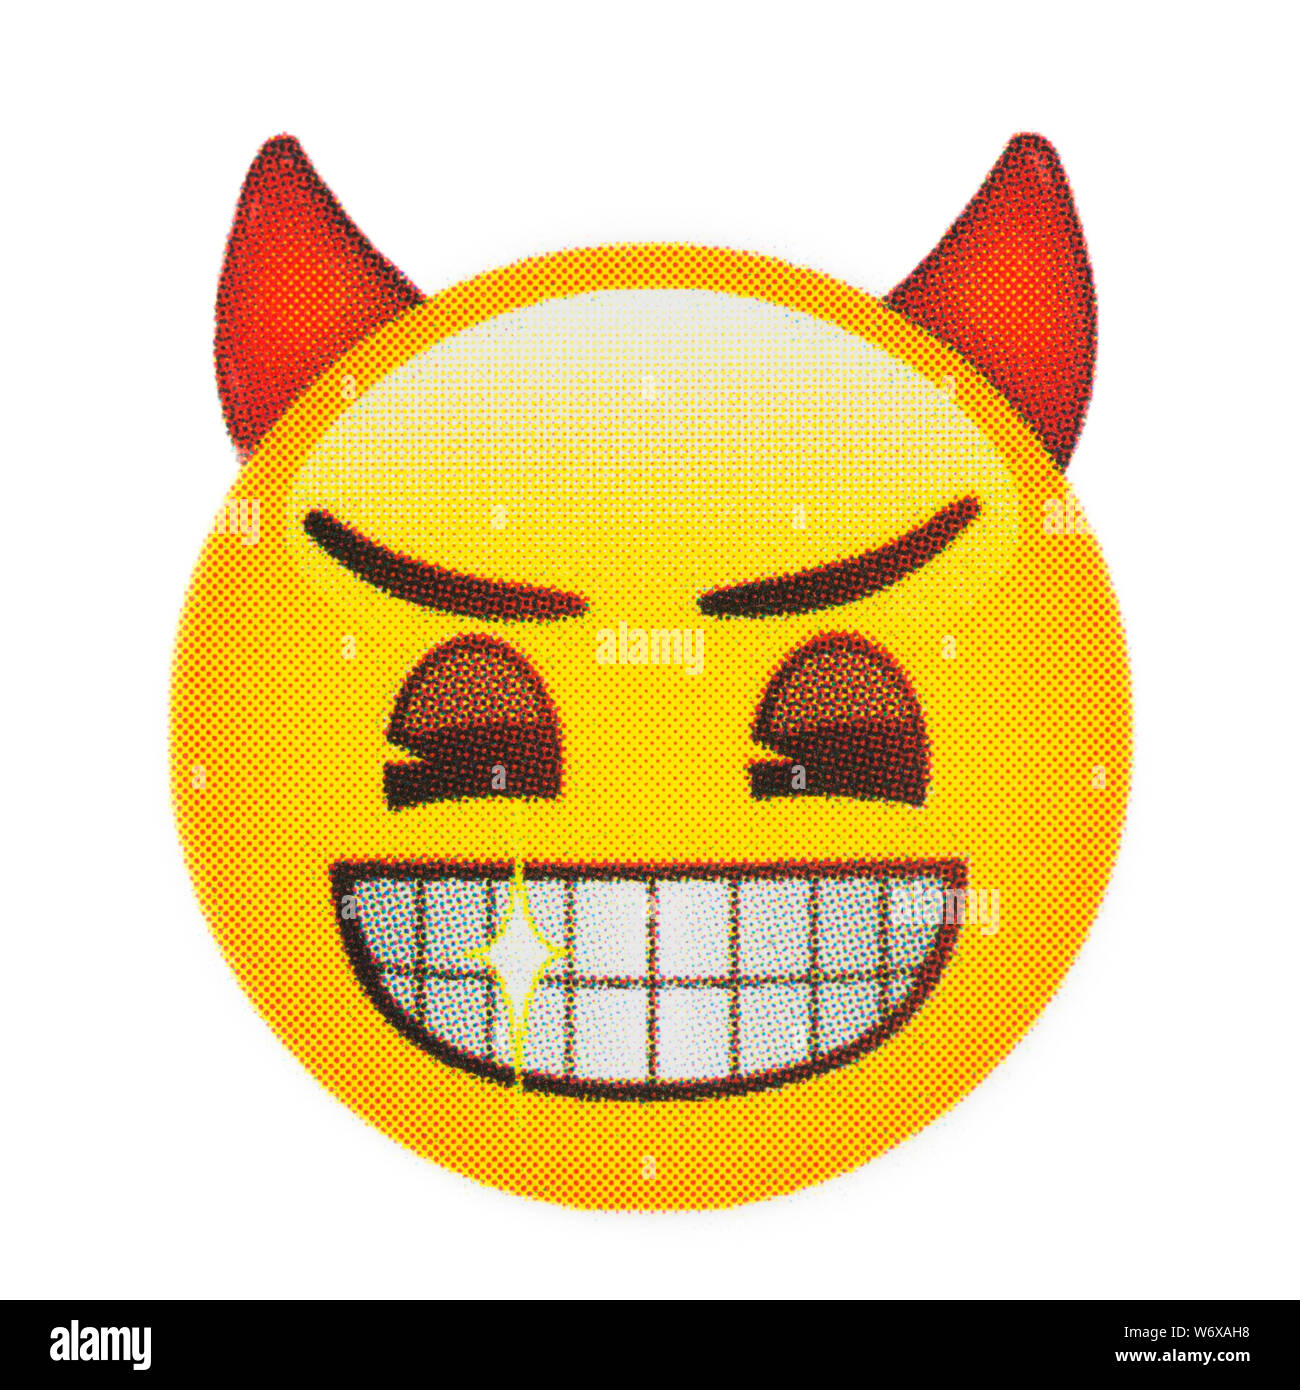 Grinning devil face with smiling eyes emoticon Stock Photo